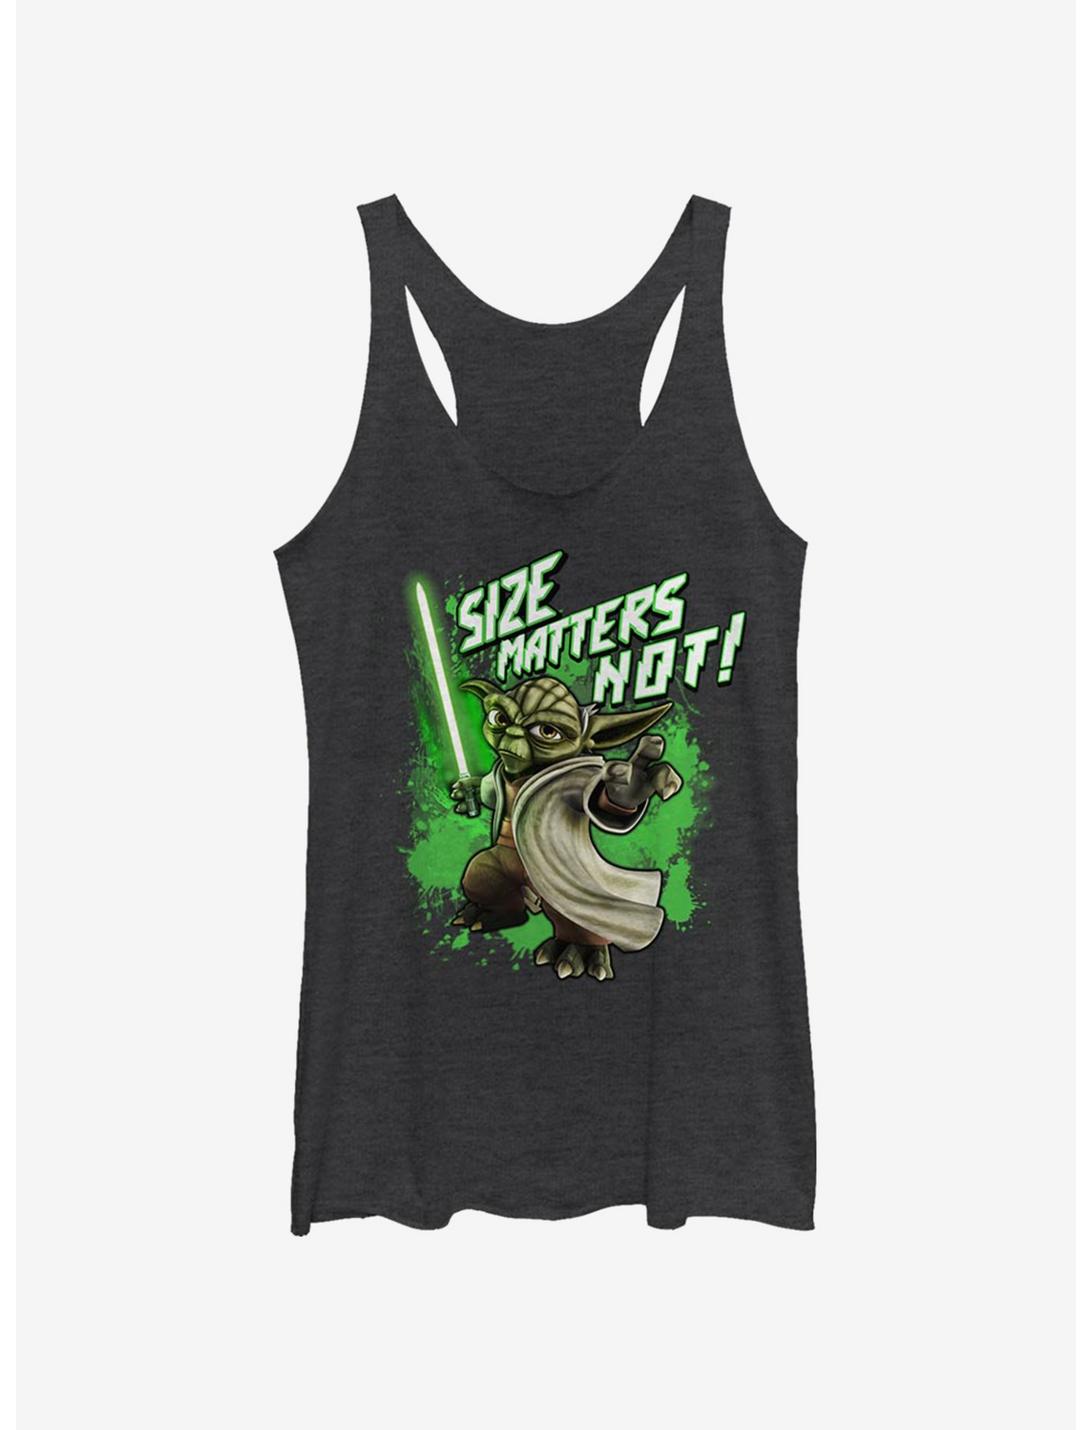 Star Wars: The Clone Wars Yoda Size Matters Not Womens Tank Top, BLK HTR, hi-res